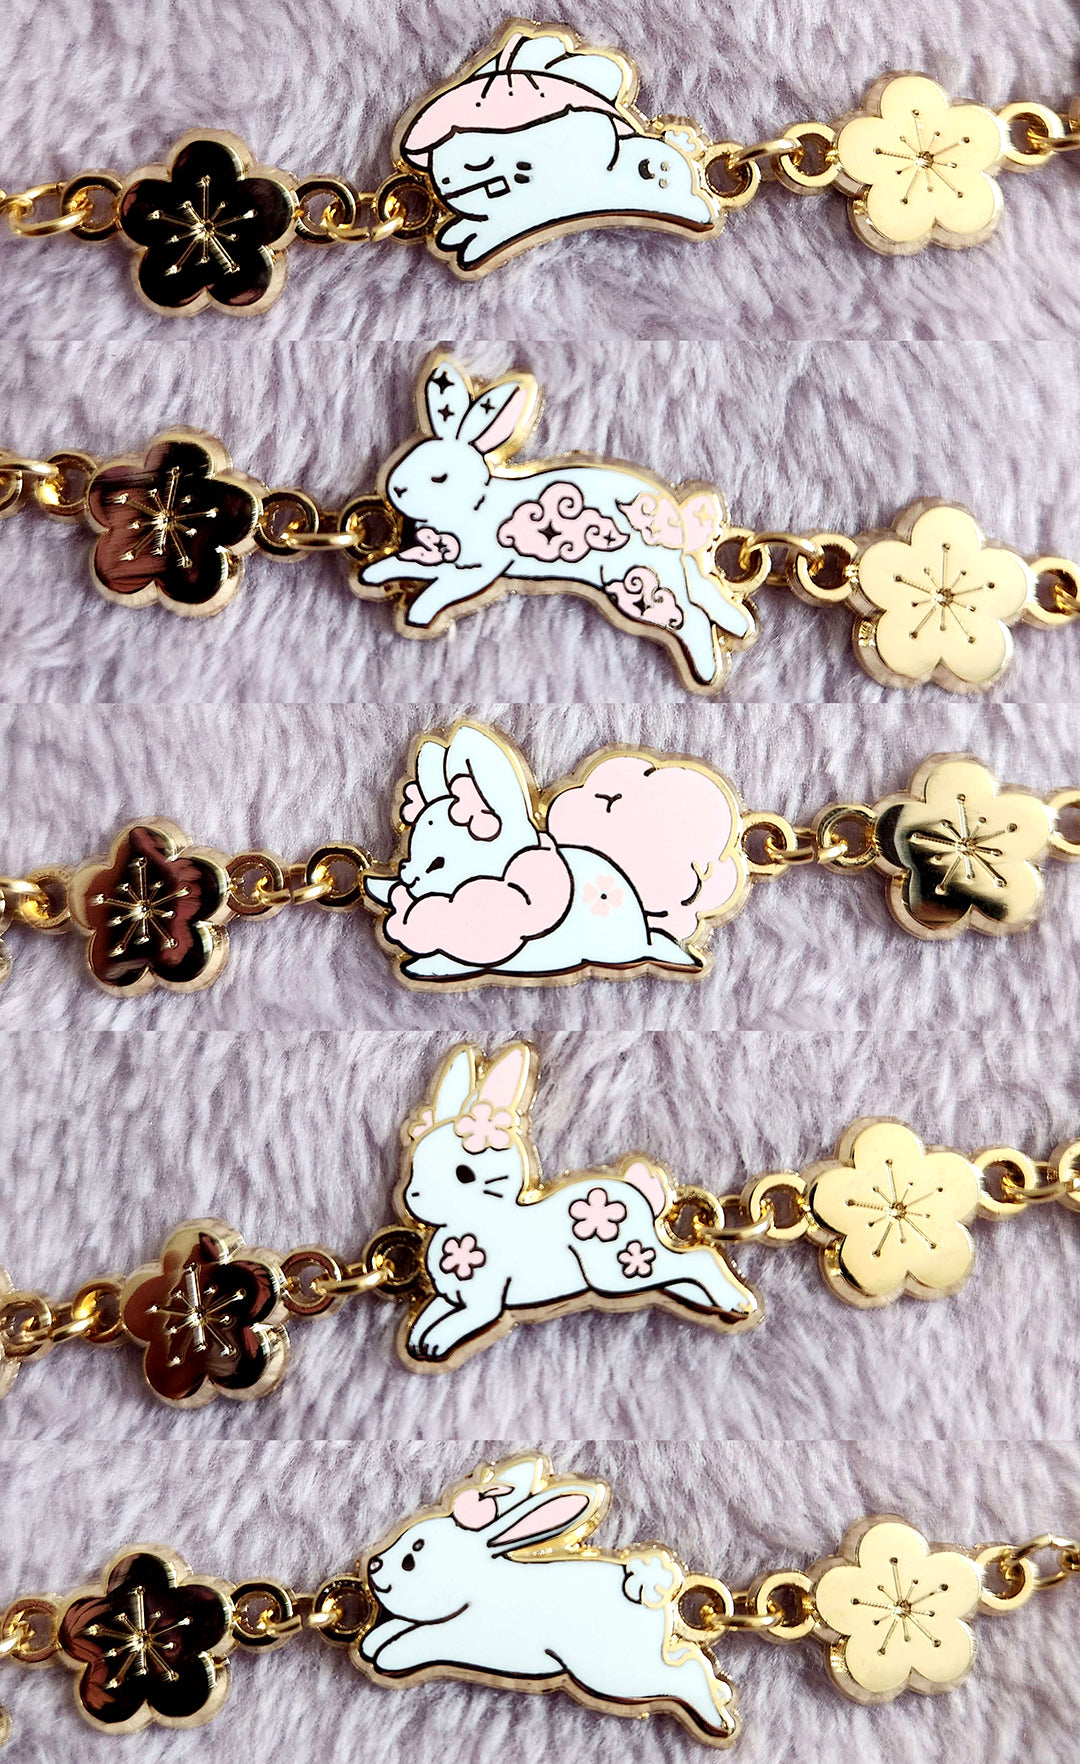 Leaping Bunny Necklace